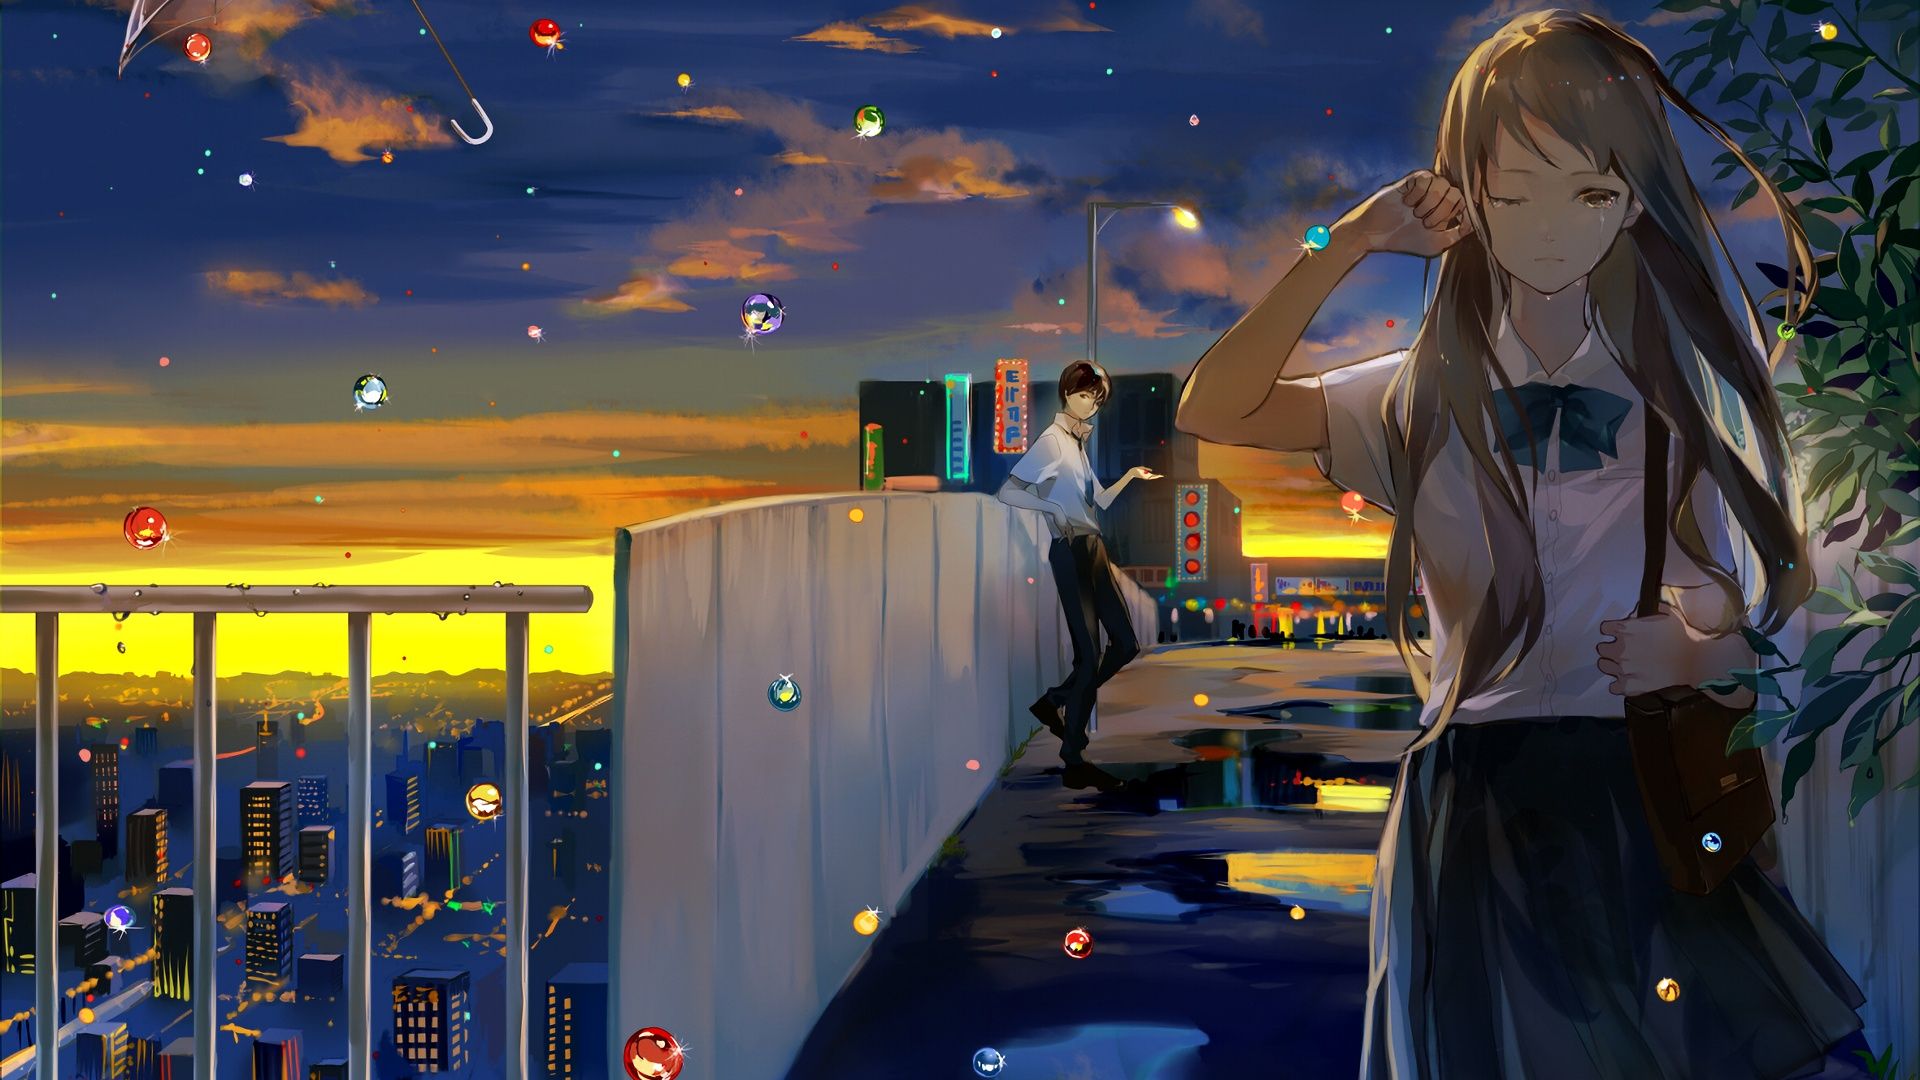 Desktop Wallpaper Crying, Anime Girl, Night, Original, Hd Image, Picture,  Background, 35a409